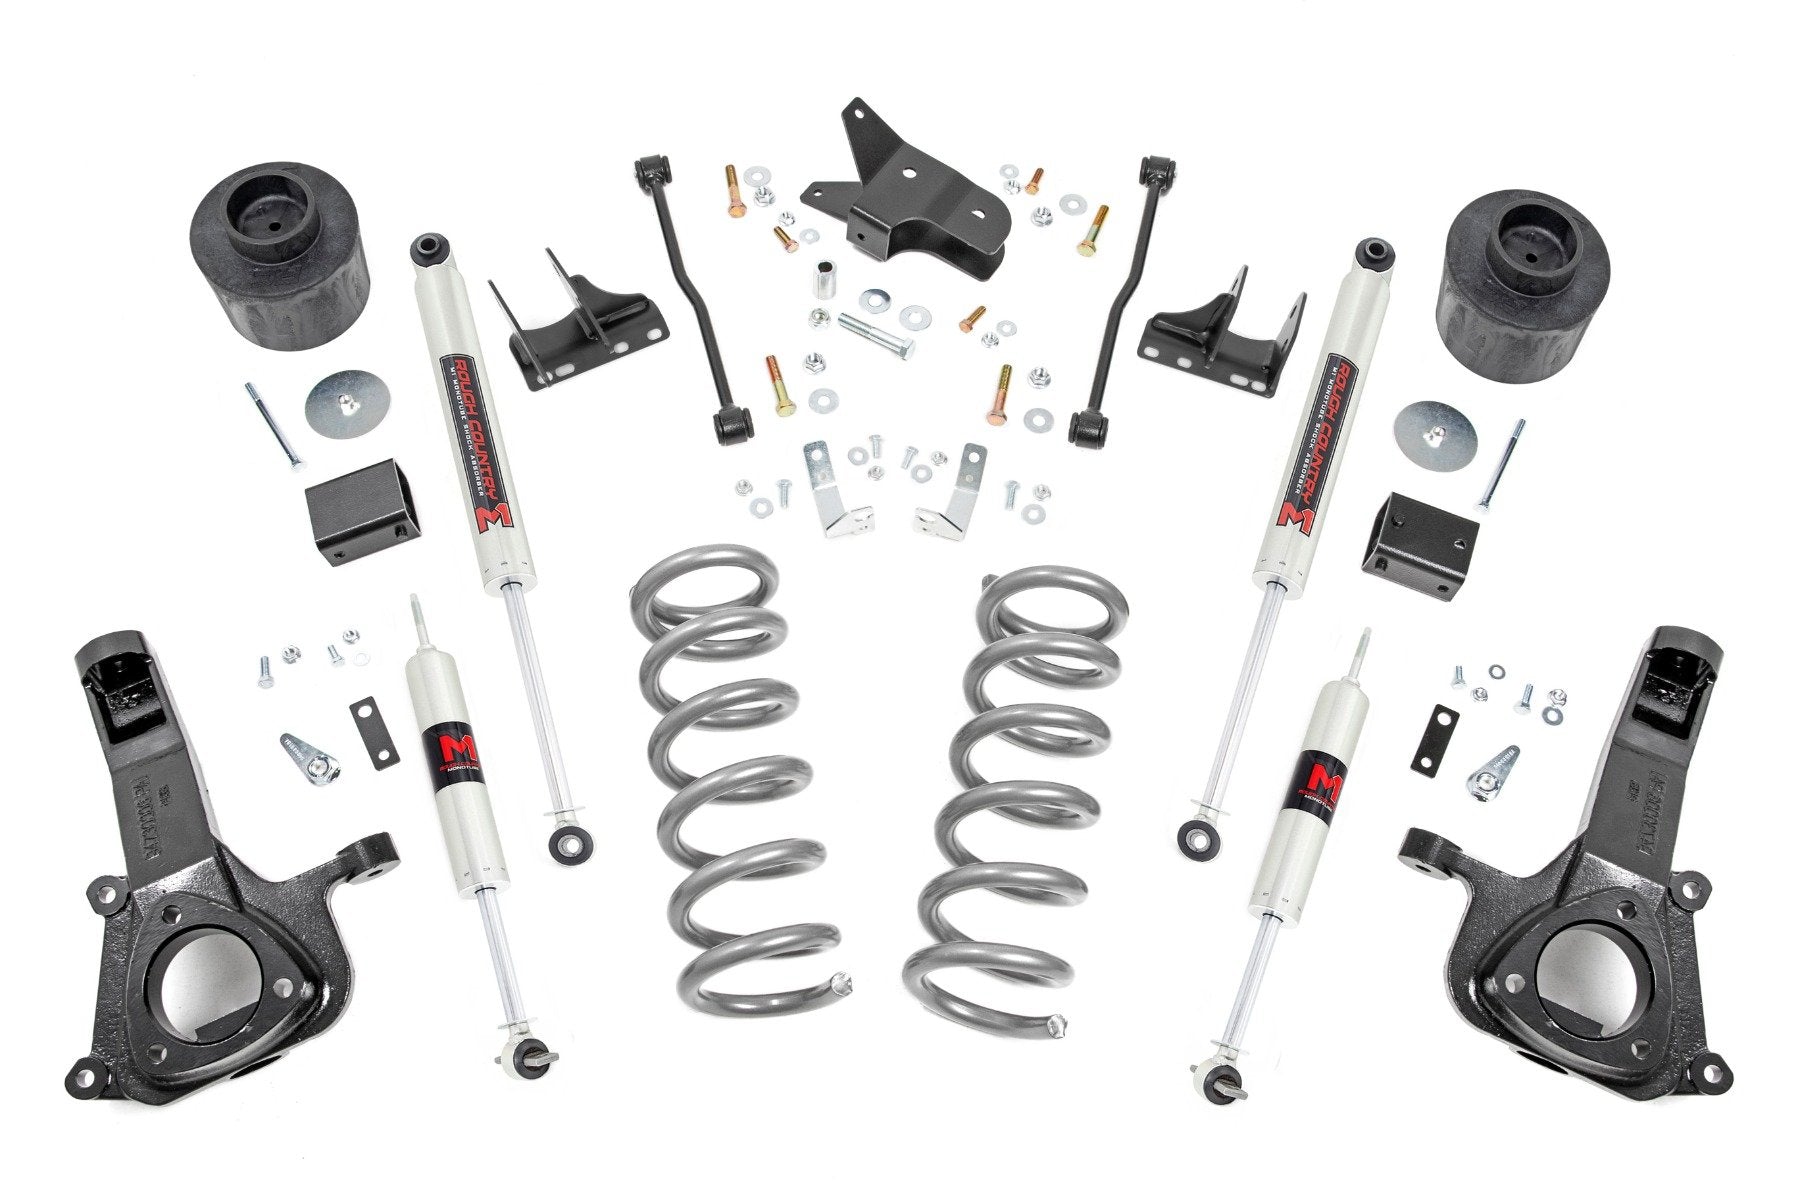 Rough Country 6 Inch Lift Kit | M1 | Ram 1500 2WD (09-18)